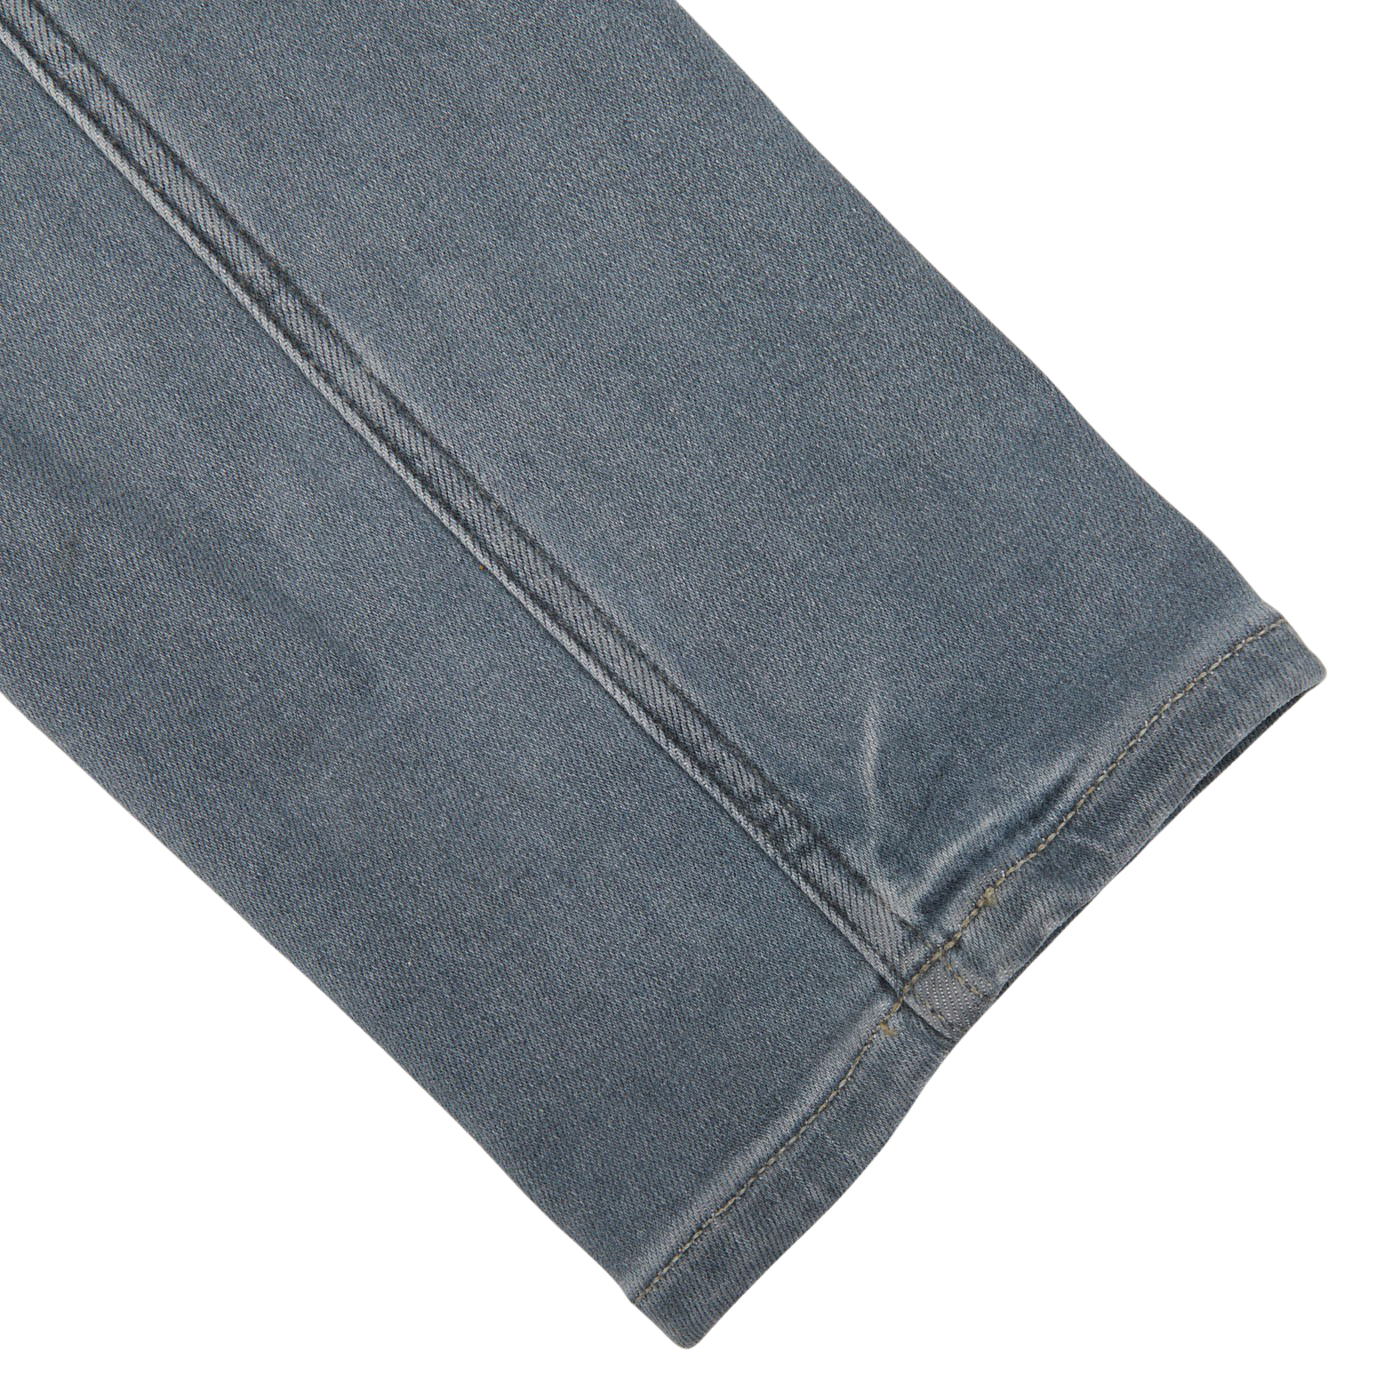 A close up of a pair of Grey-Blue Cotton Stretch Lennox Jeans by Paige.